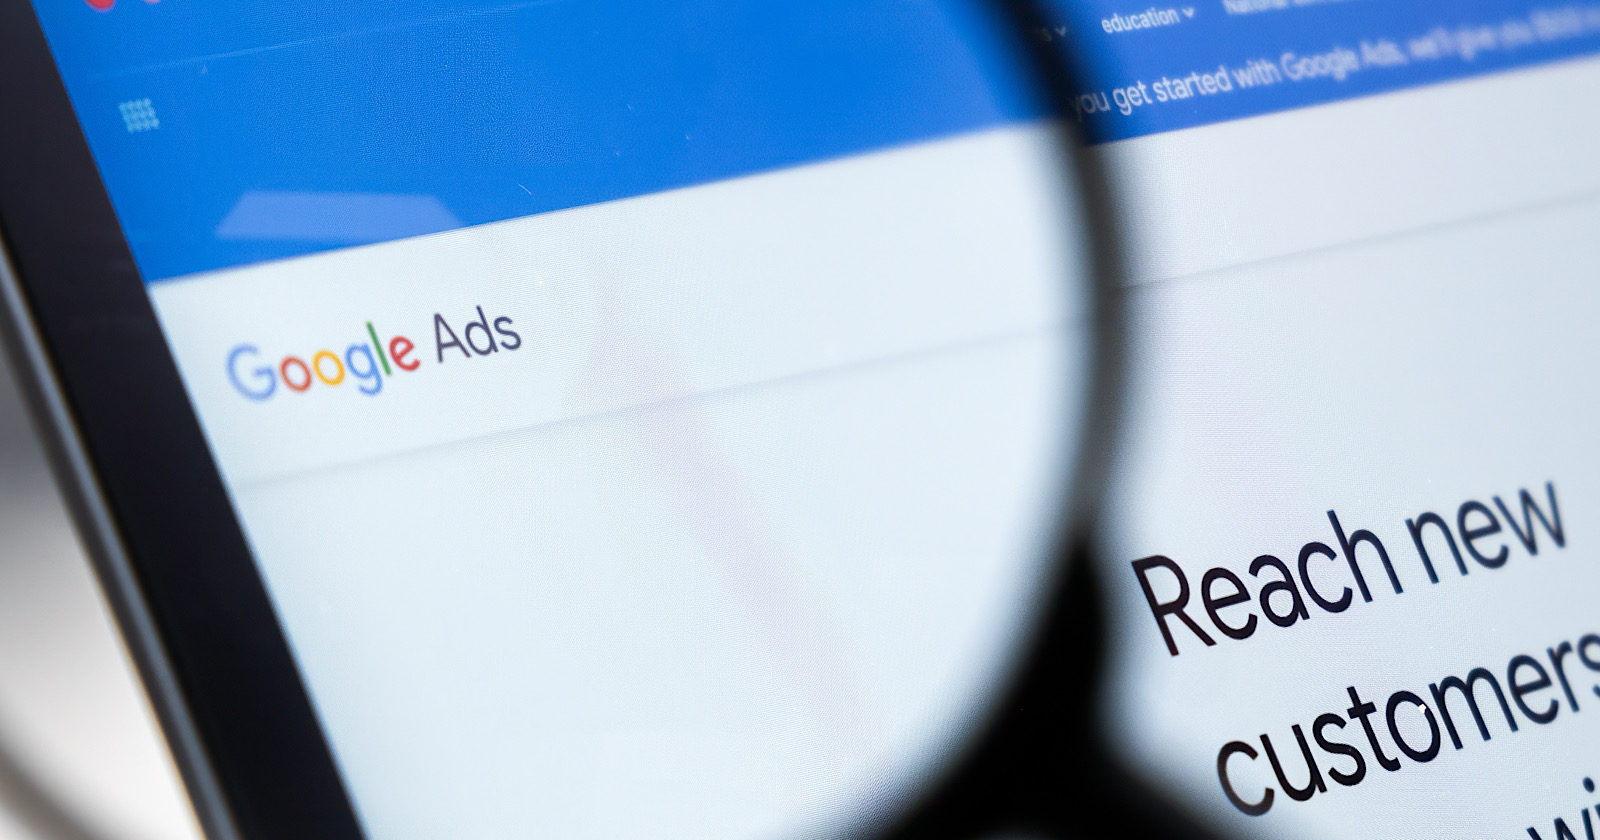 Google Ads To Retire Customizers For Text Ads via @sejournal, @MattGSouthern